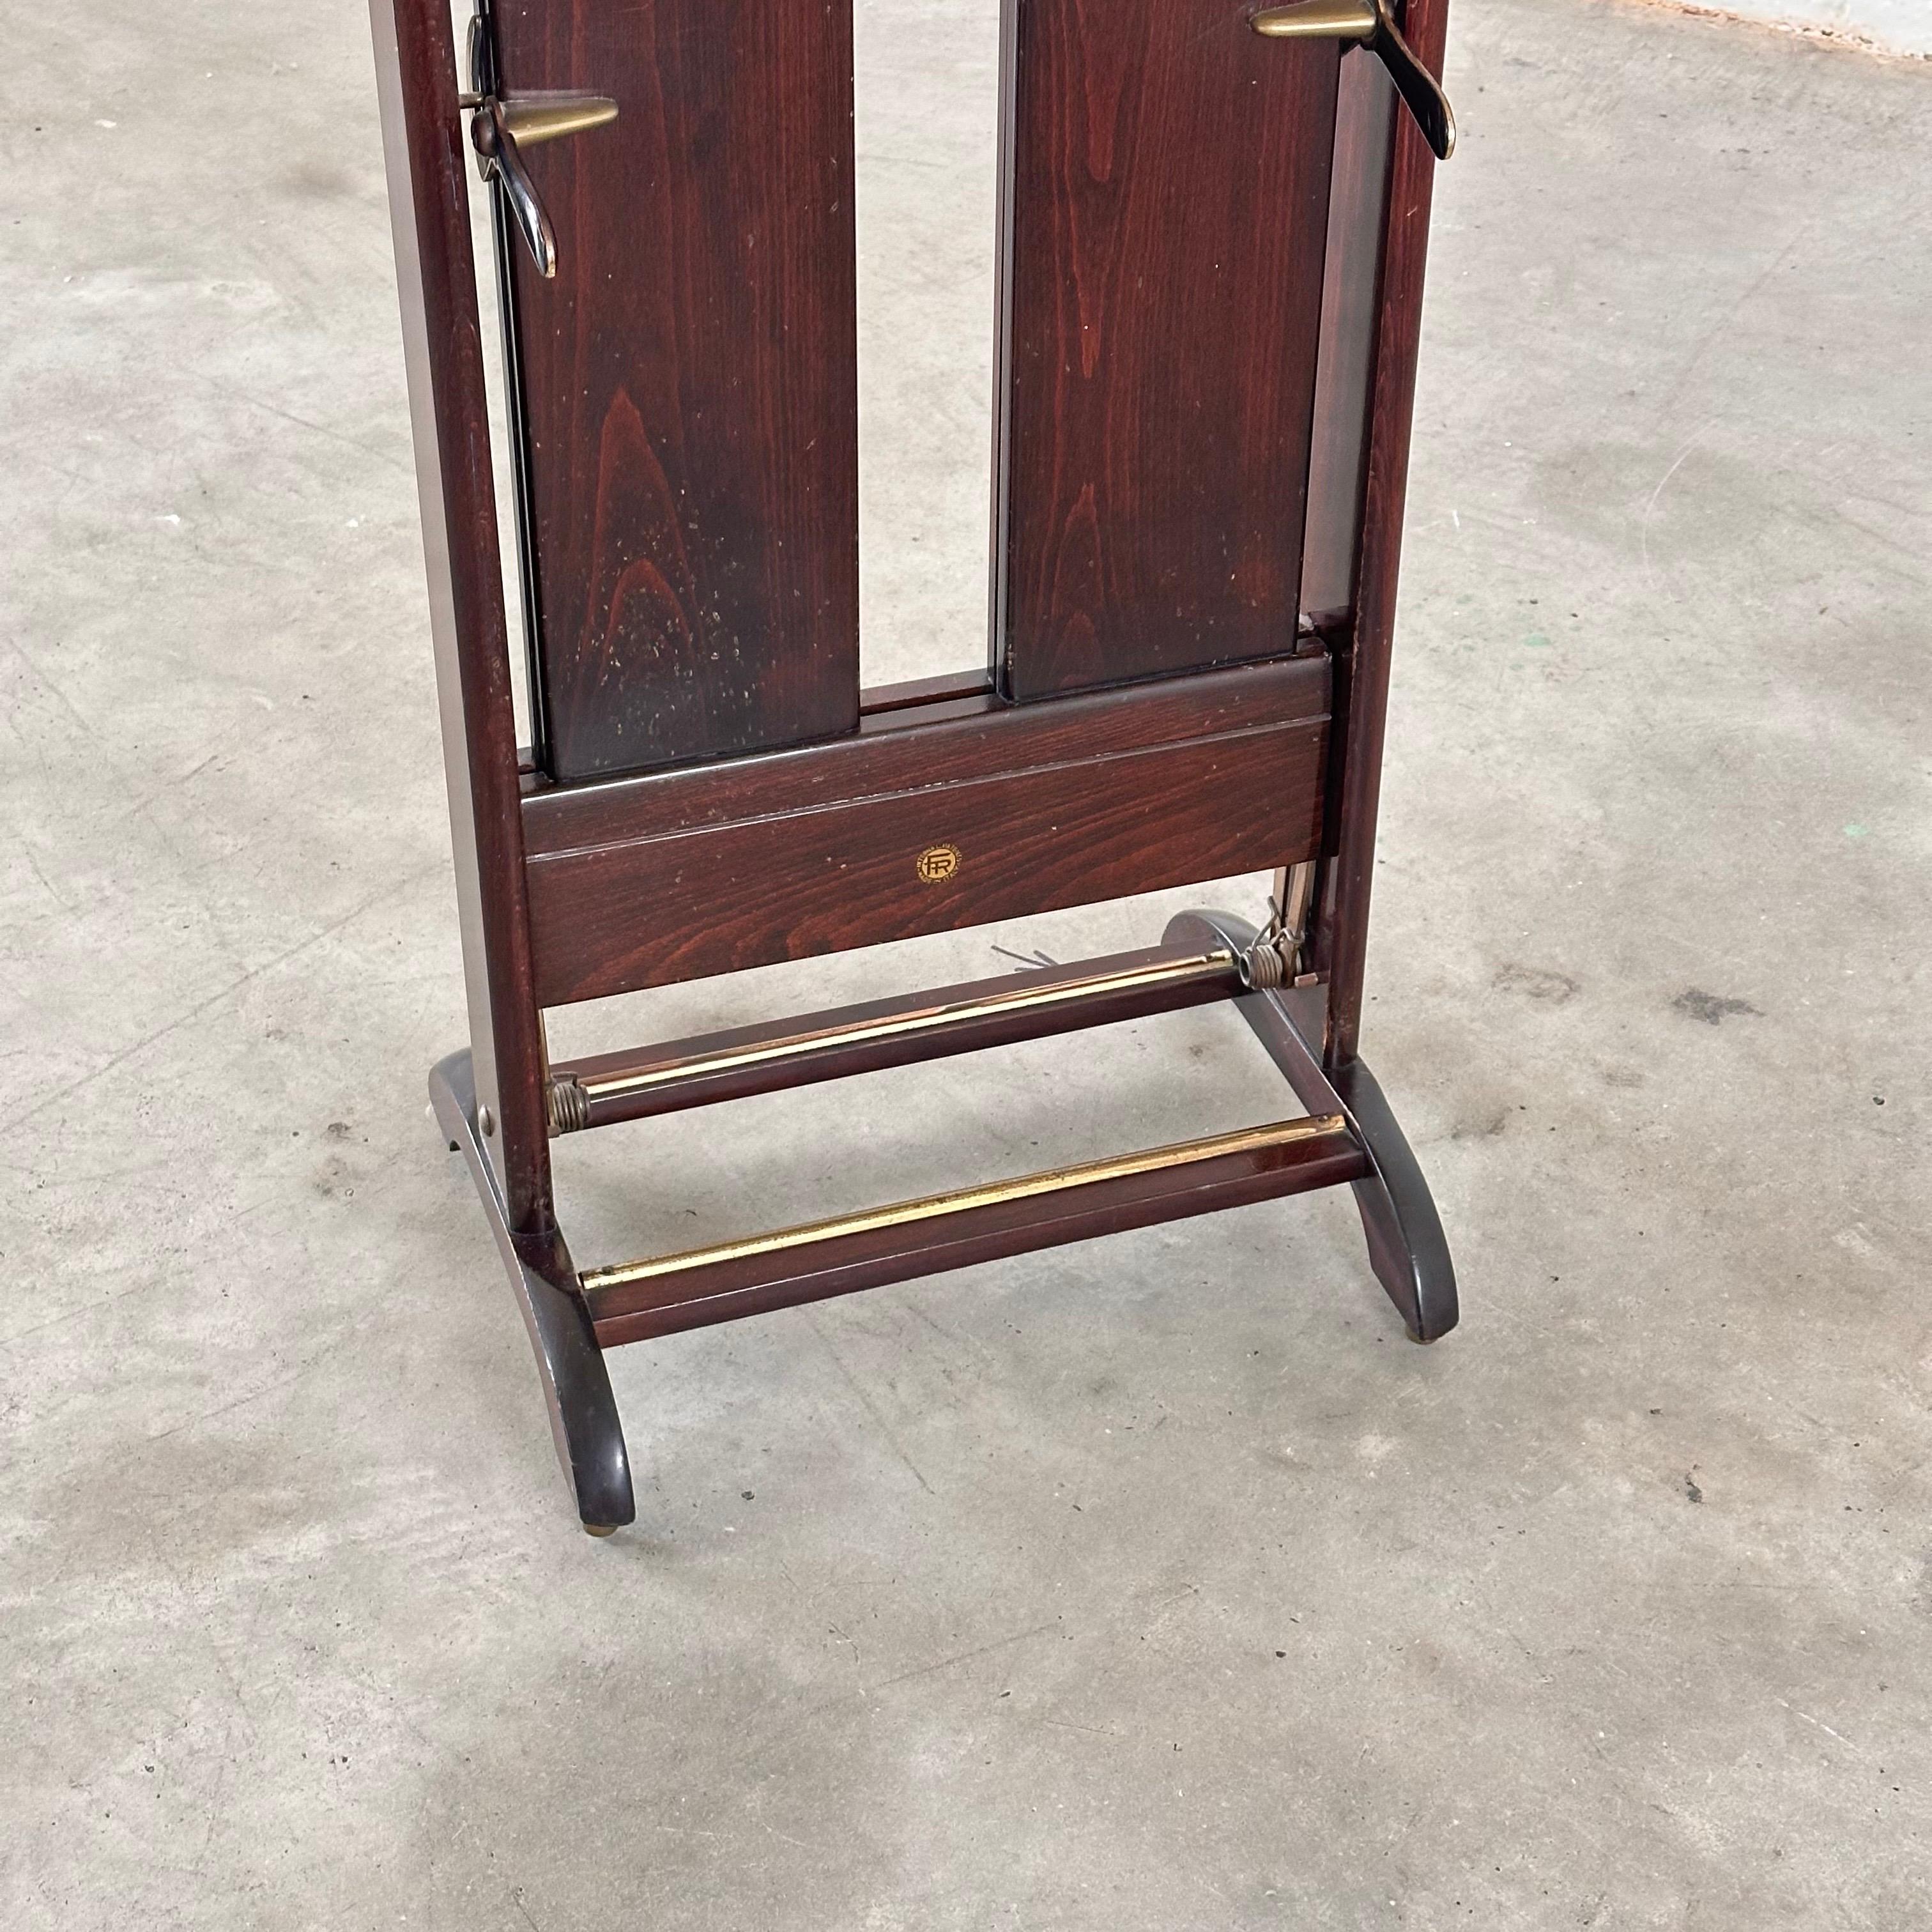 Exquisite 1950s Fratelli Reguitti Clothes Valet Stand by Ico Parisi  For Sale 12